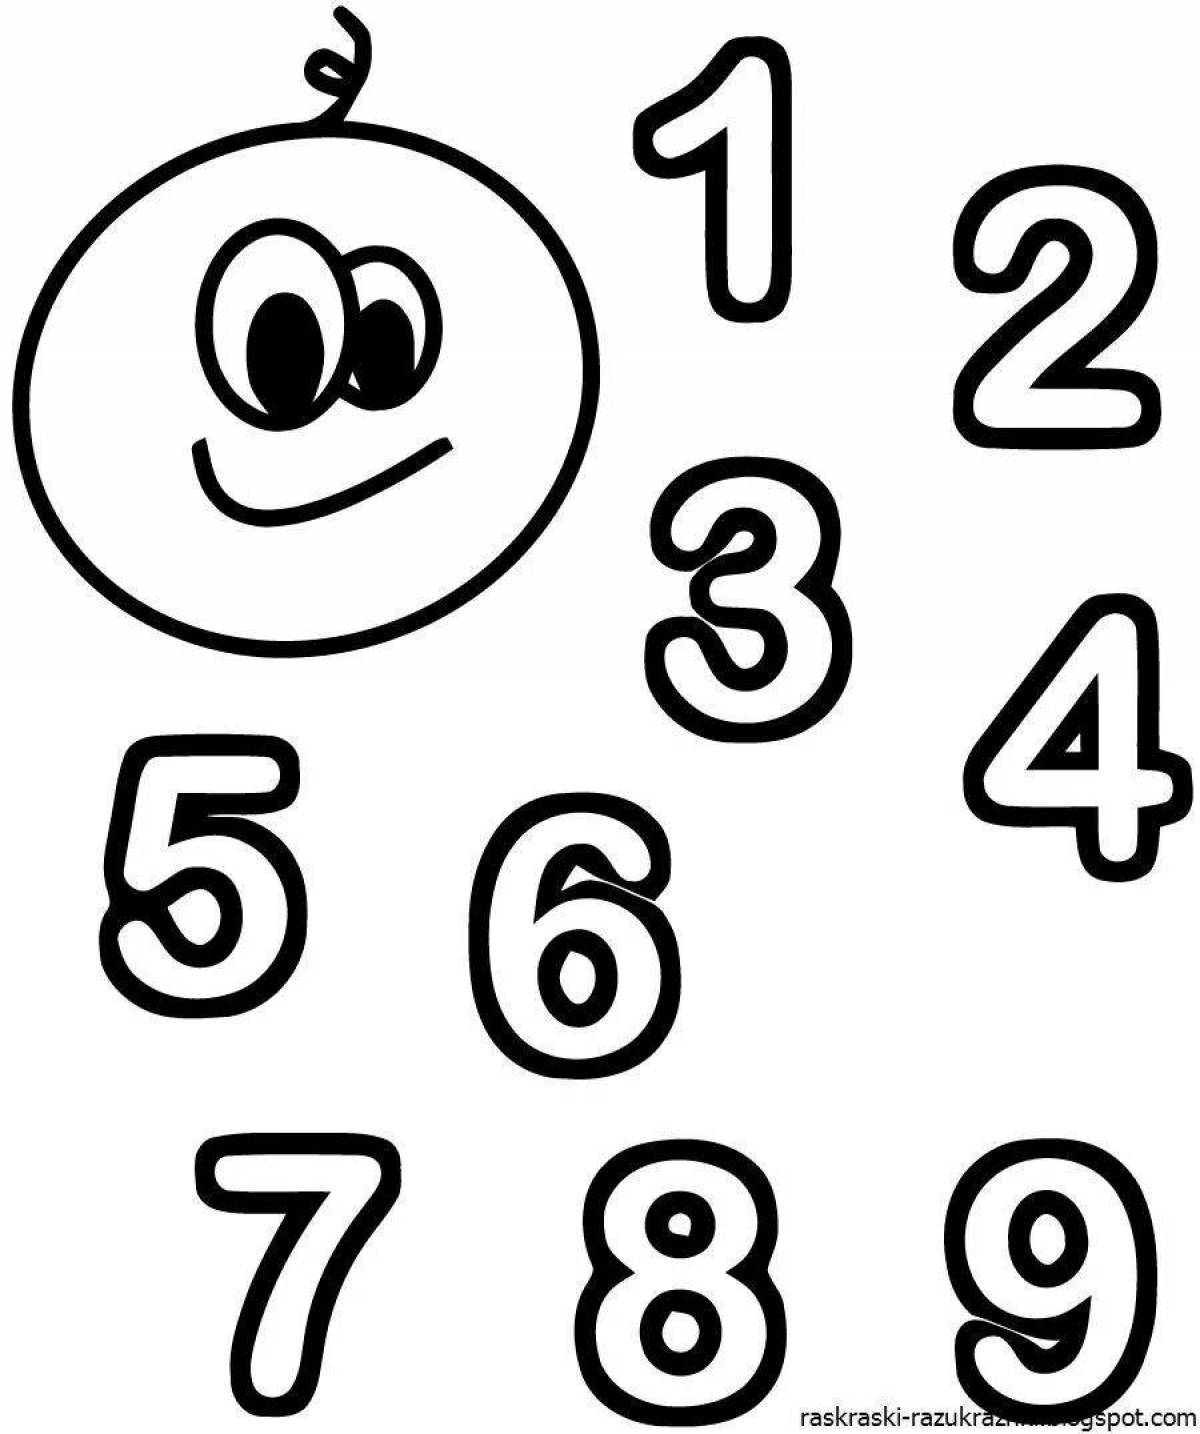 Coloring pages with crazy fun numbers